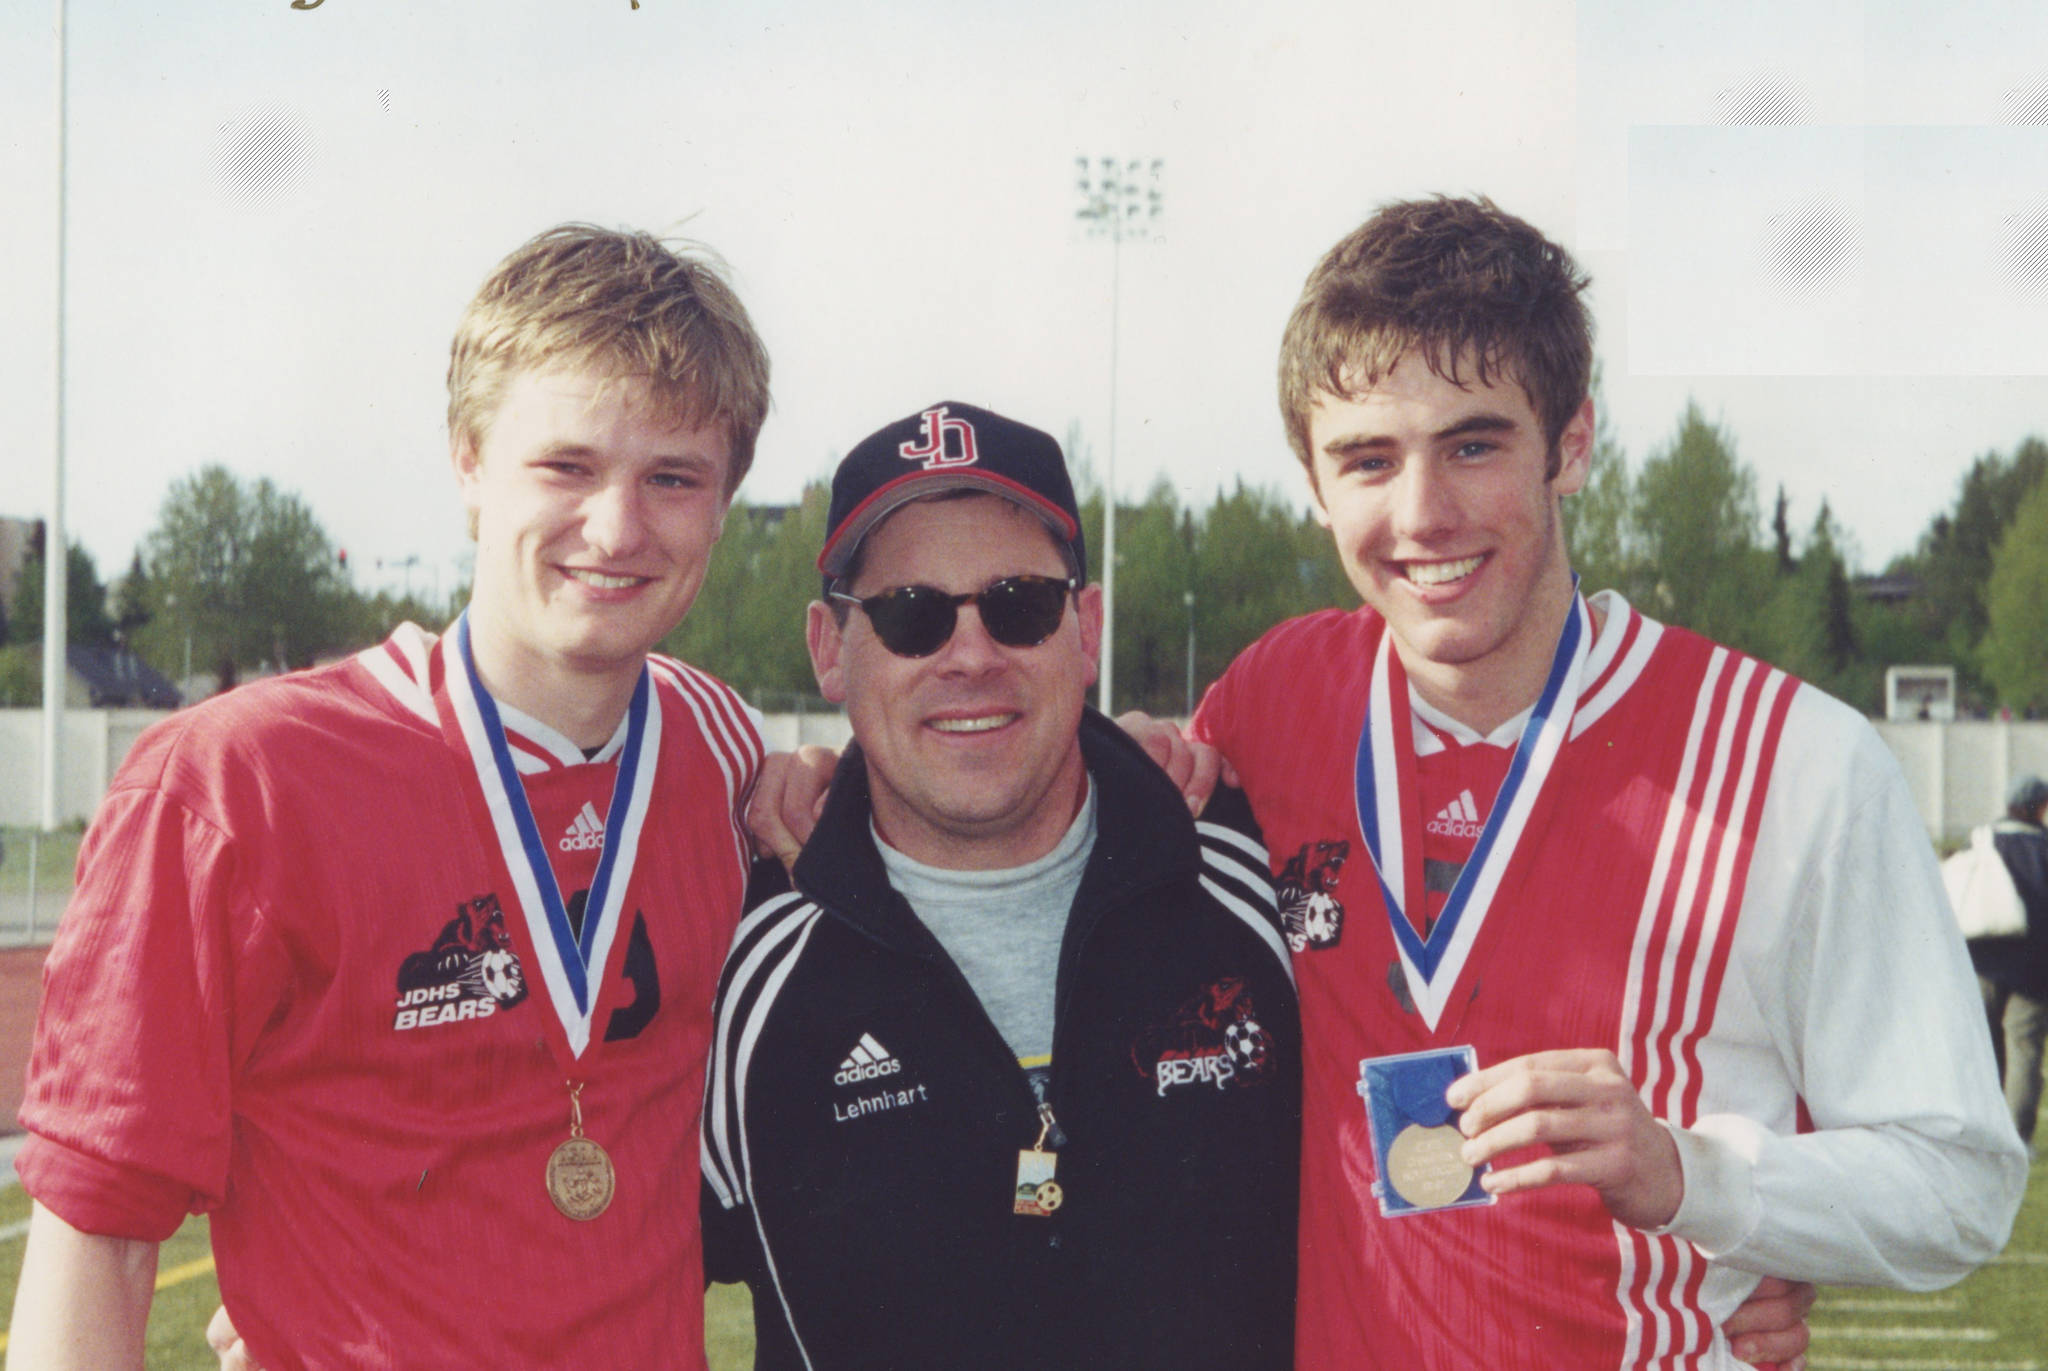 Courtesy Photo | <strong>Susan Knowles</strong>                                Juneau-Douglas High School soccer coach Gary Lehnhart, center, poses senior Justin Dorn, left, and Luke Knowles following the Crimson Bears’ win over Dimond in the 2001 state championship in Anchorage. Dorn was inducted into the ASAA High School Hall of Fame on May 5.